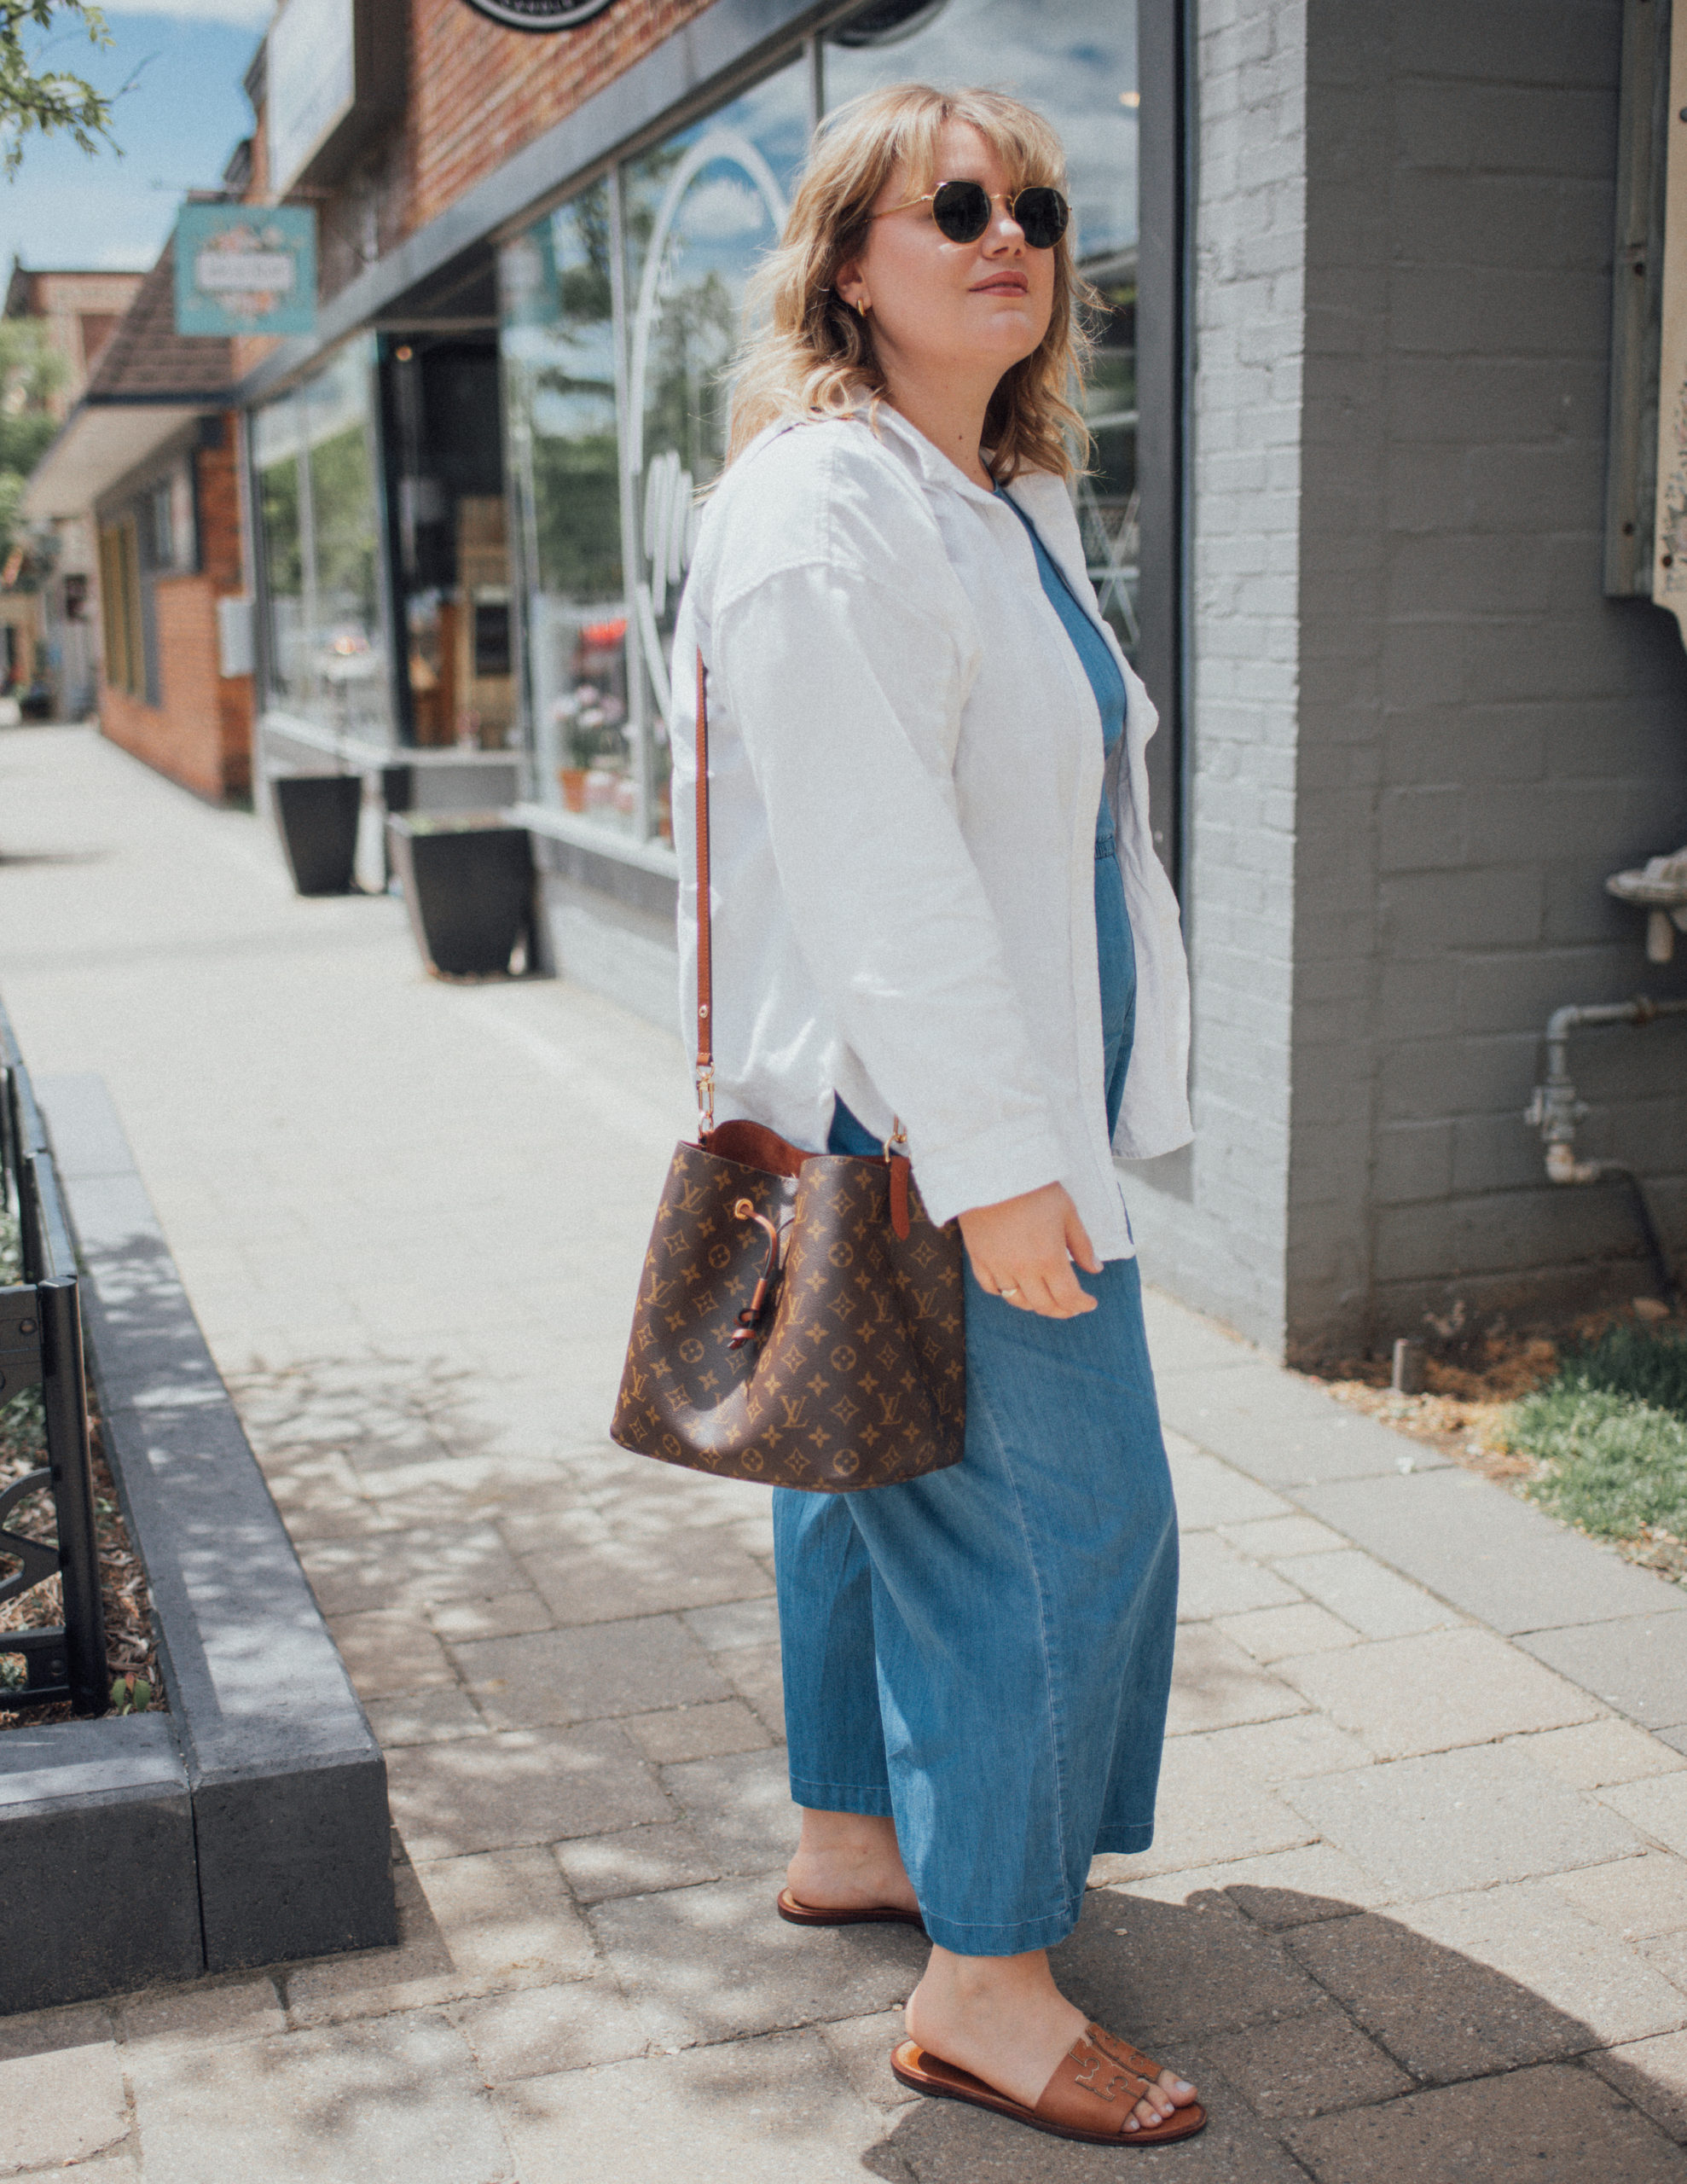 Sharing a plus size coastal grandmother style outfit. Coastal grandmother style is all things light layers, casual chic and comfortable! 